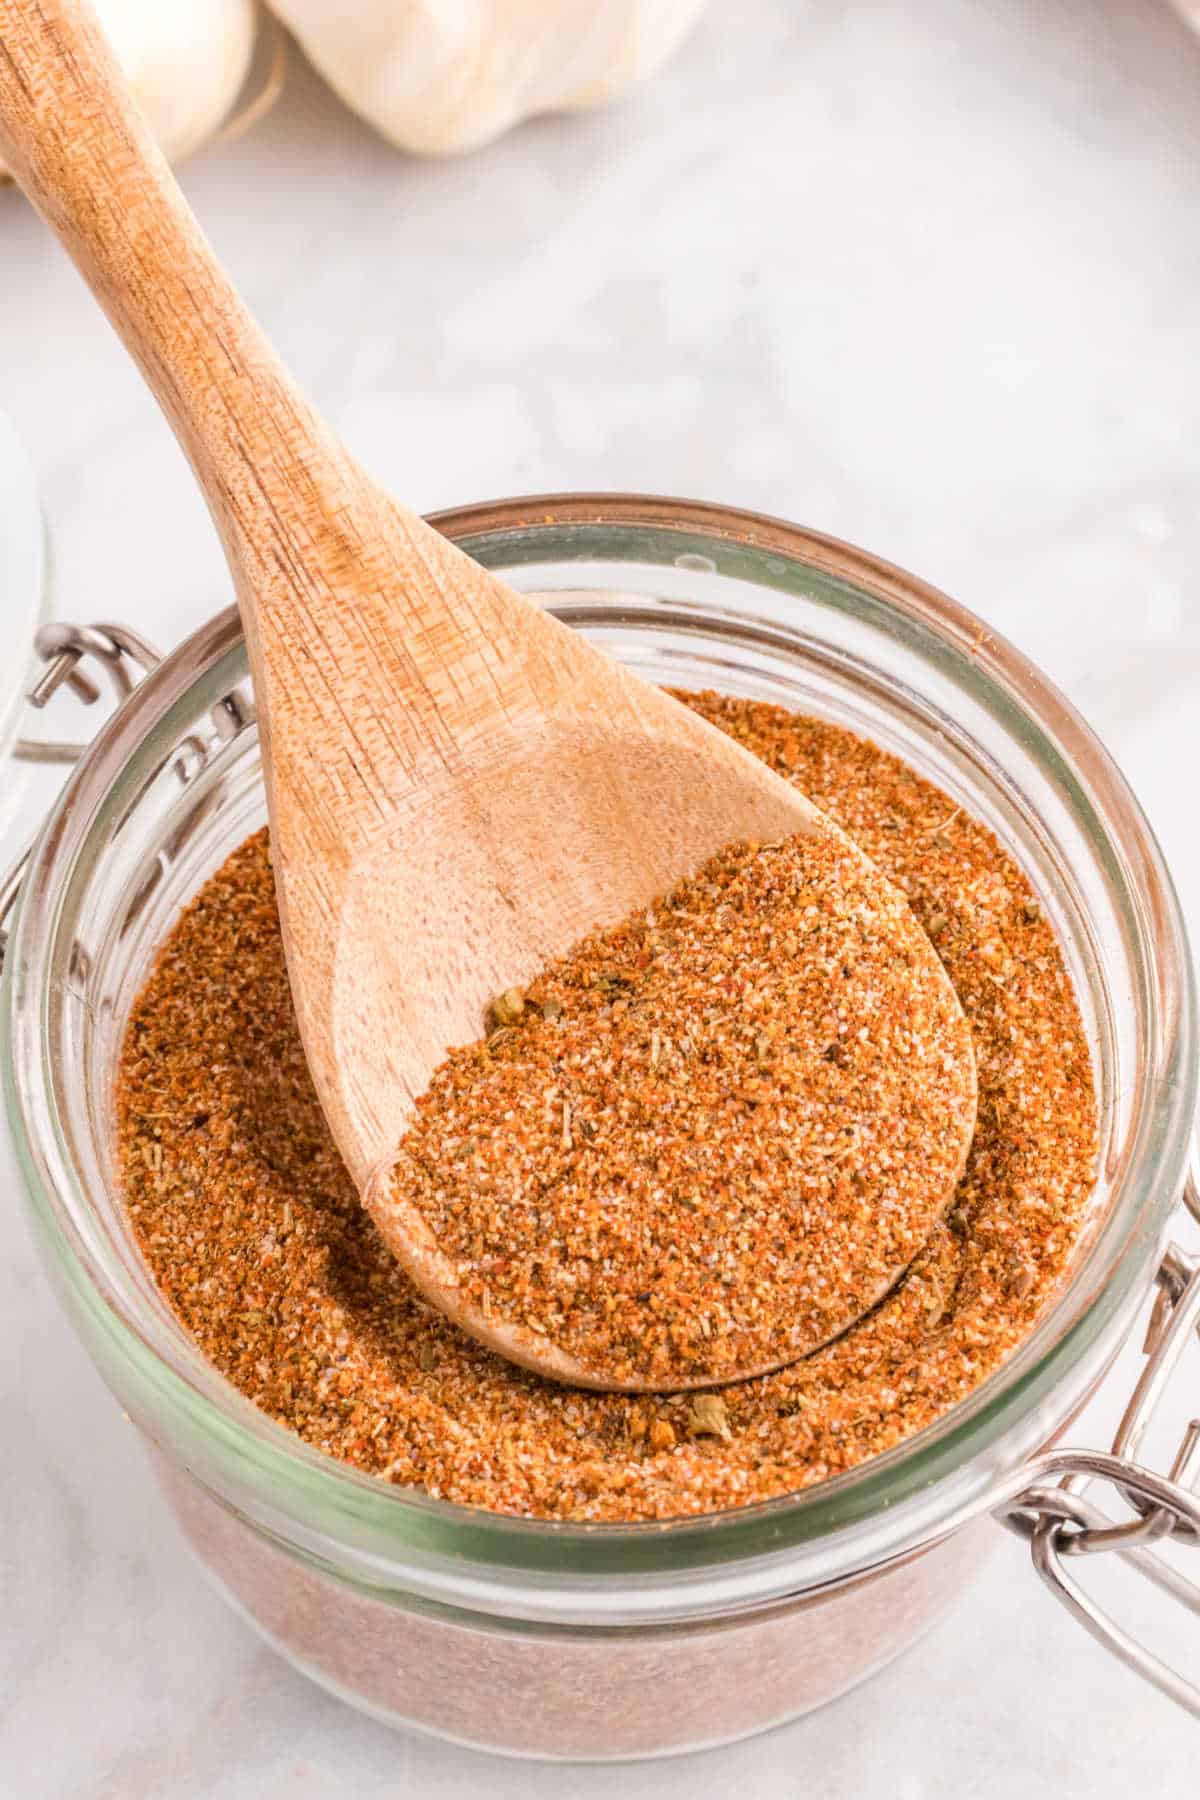 Cajun seasoning in a canister with a wooden spoon.